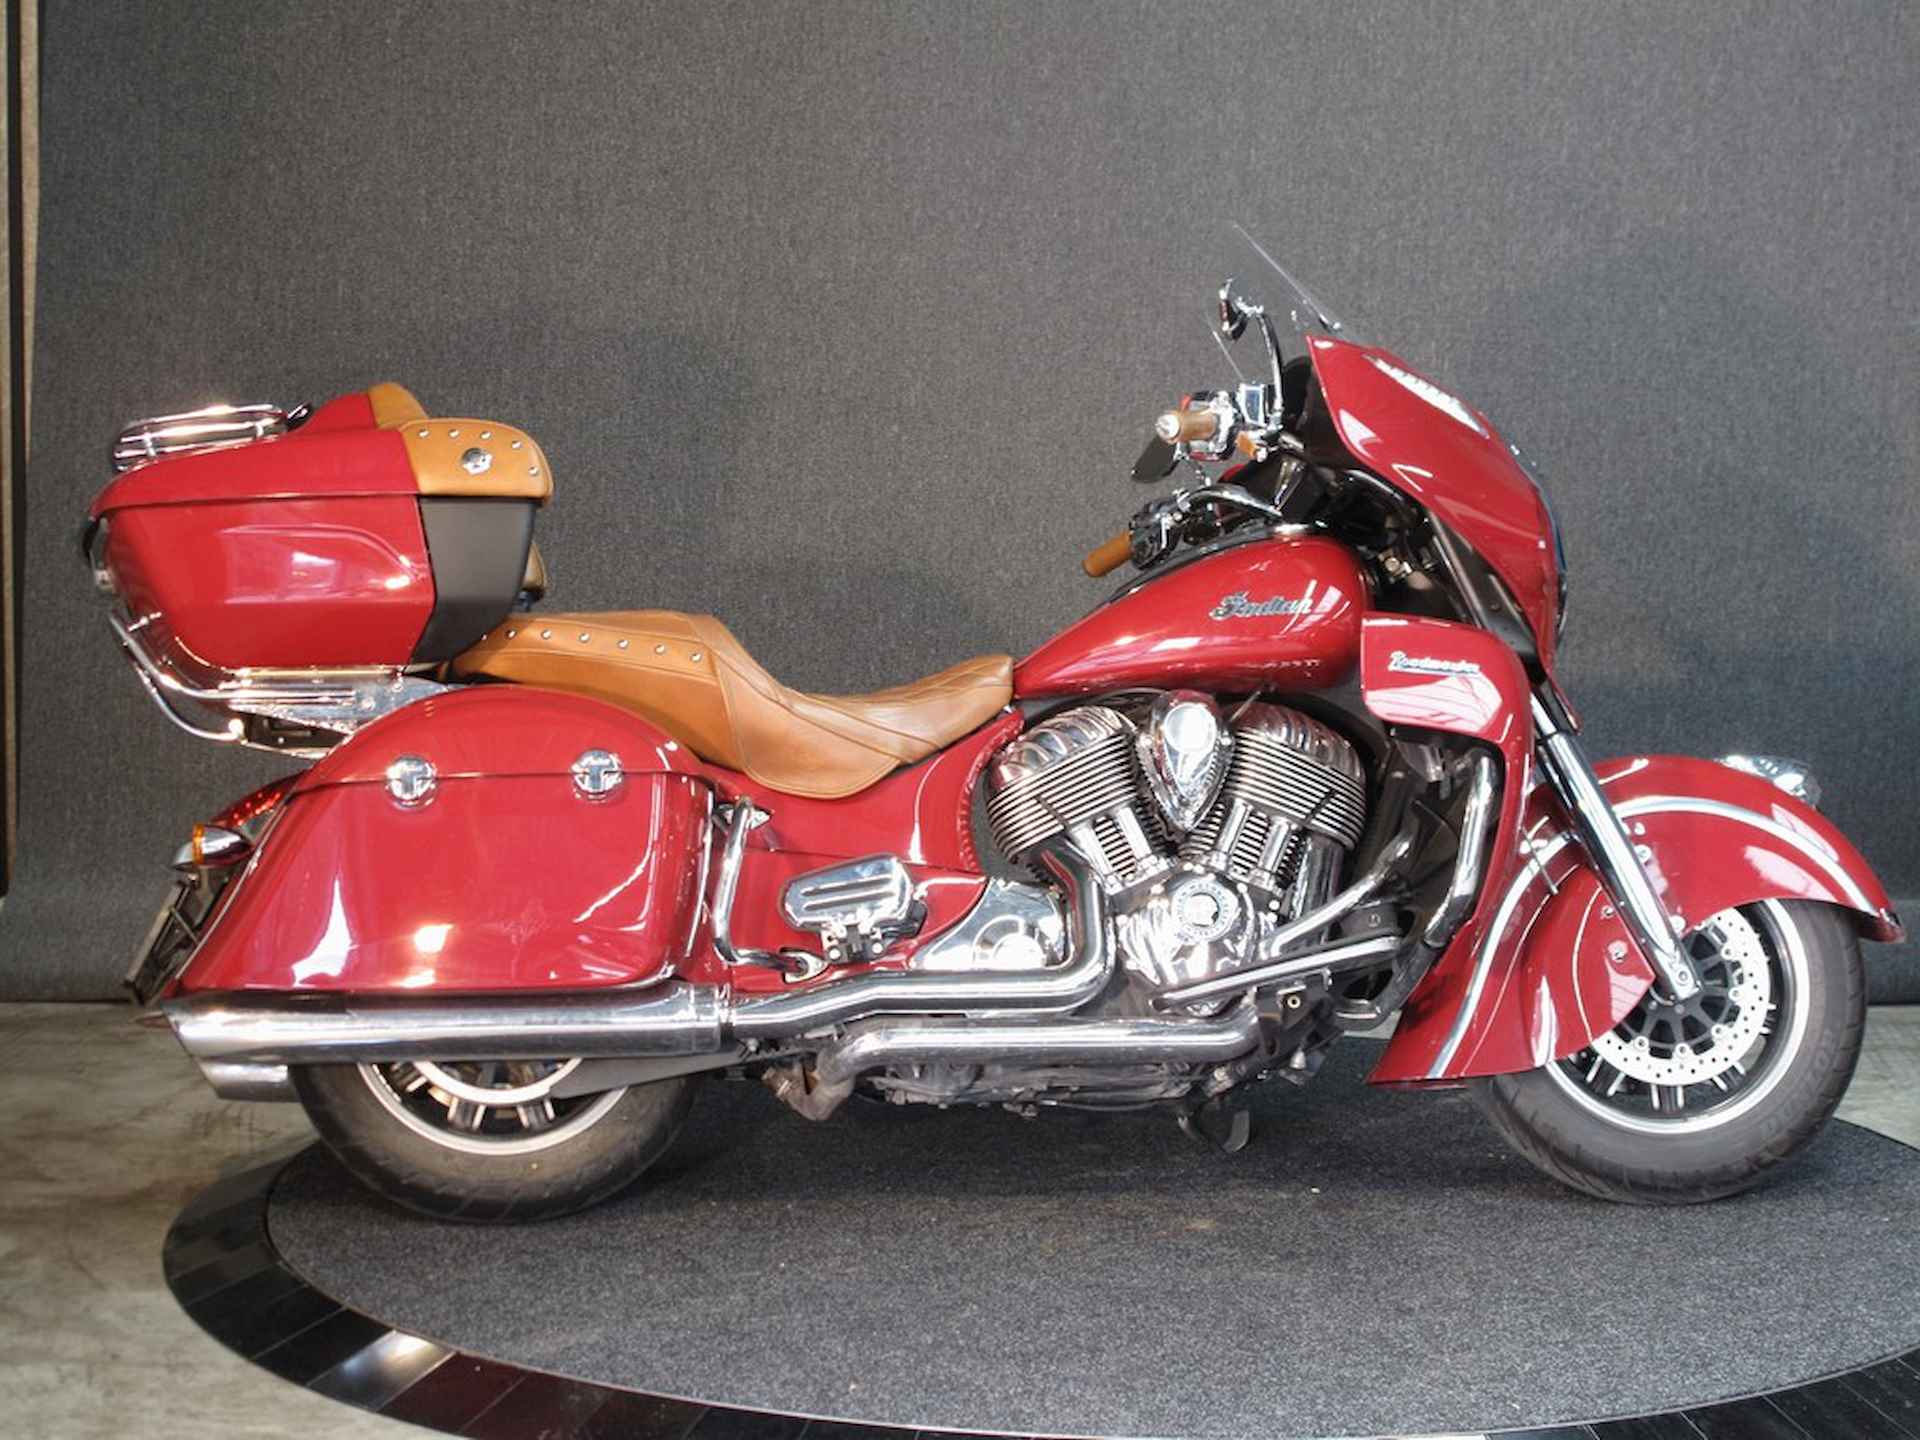 Indian Roadmaster The official Indian Motorcycle Dealer - 6/13